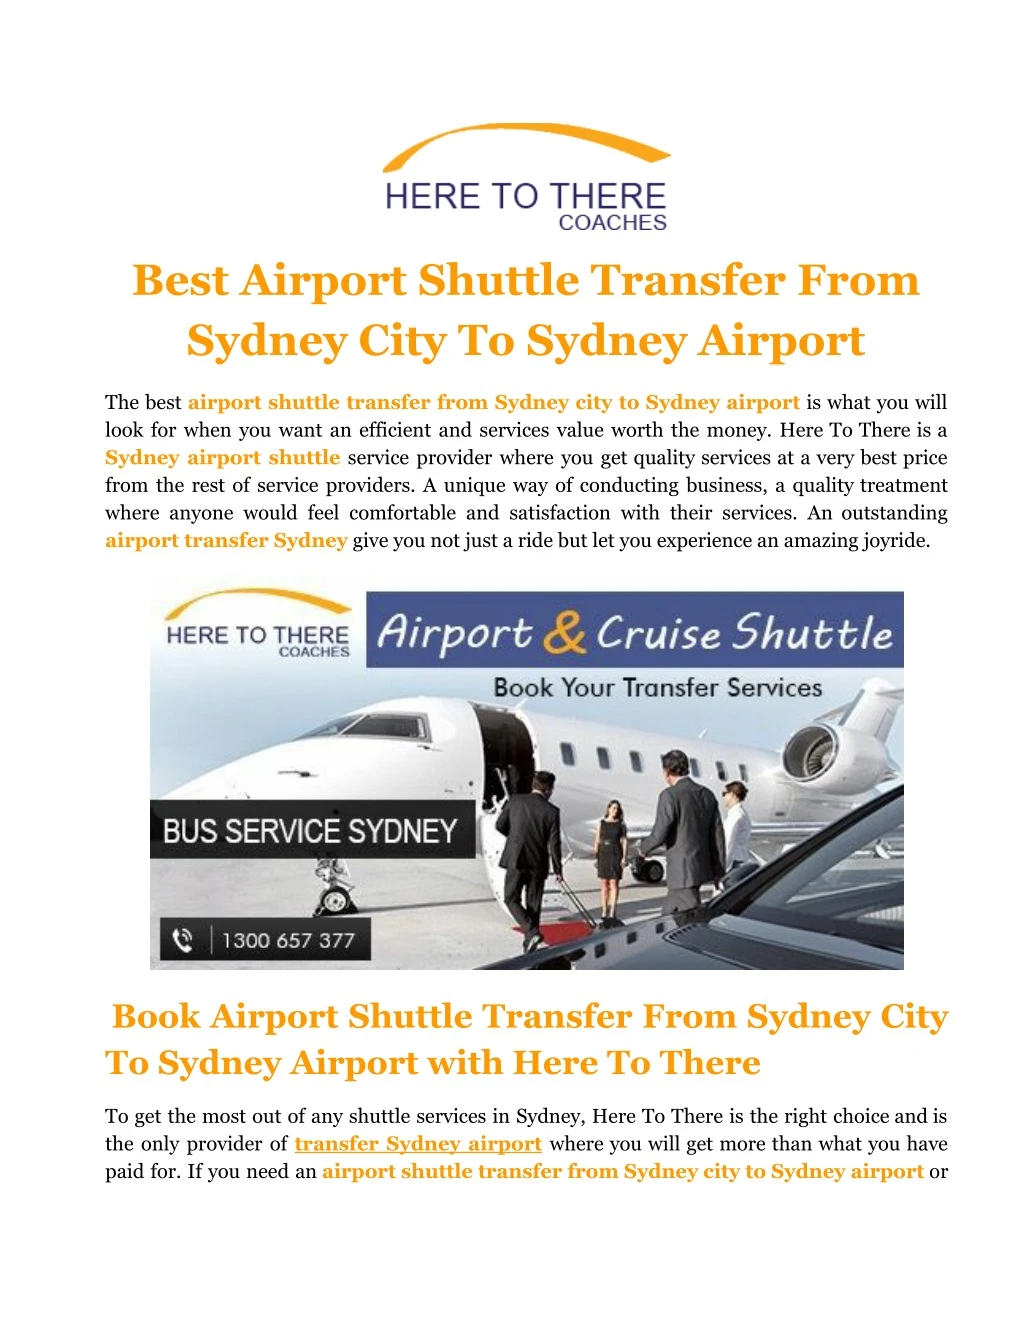 best airport shuttle transfer from sydney city